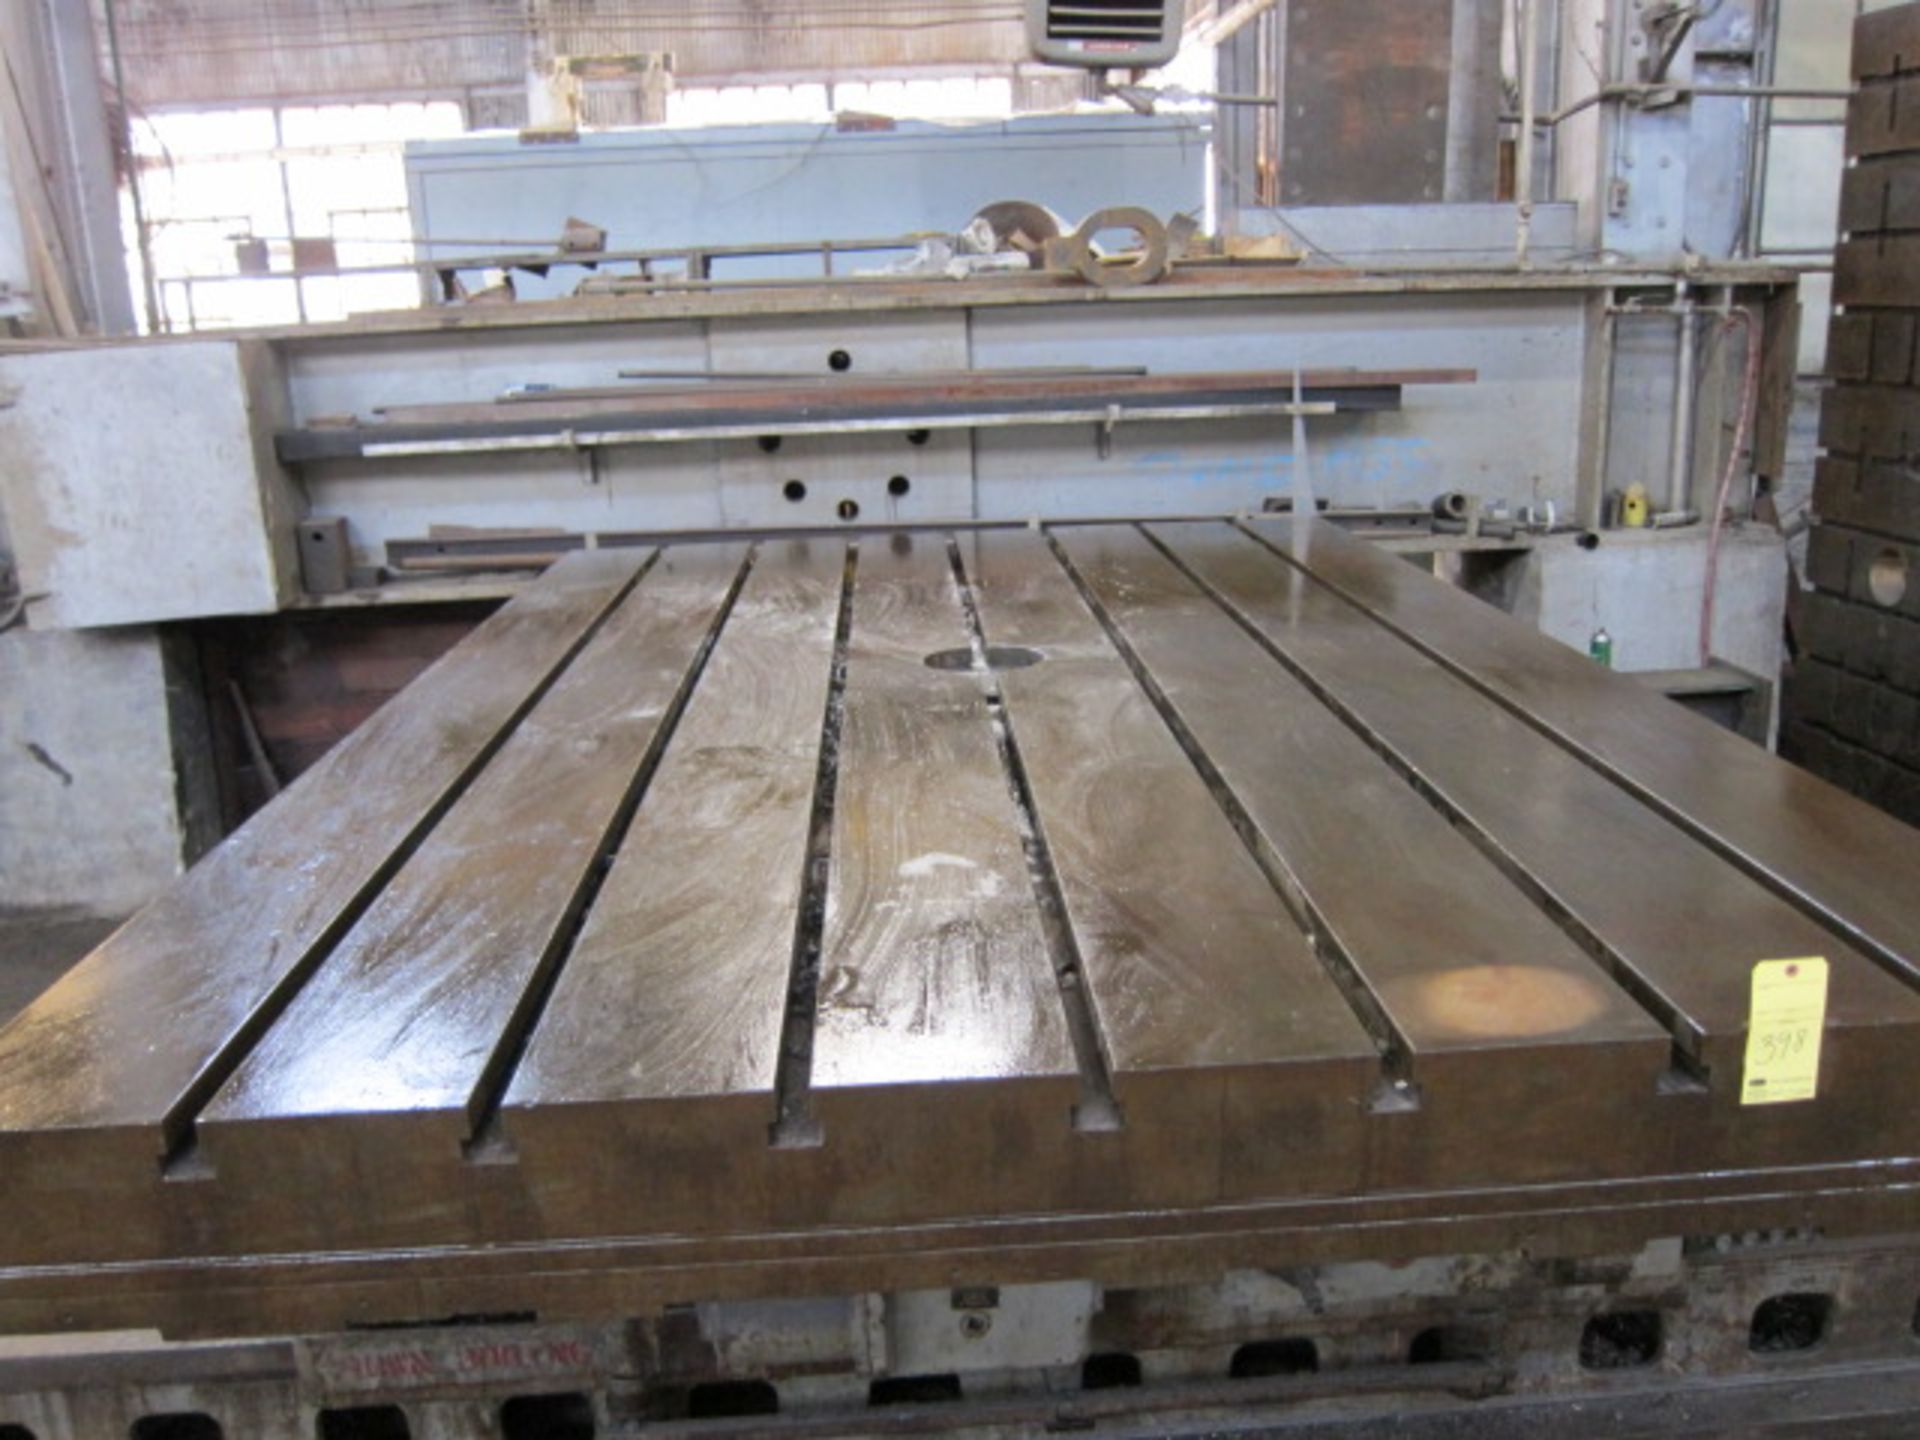 INFEEDING ROTARY TABLE, GIDDINGS & LEWIS 96"W. X 145-1/2"L., Mdl. 7RT, on sliding base, approx. - Image 3 of 3